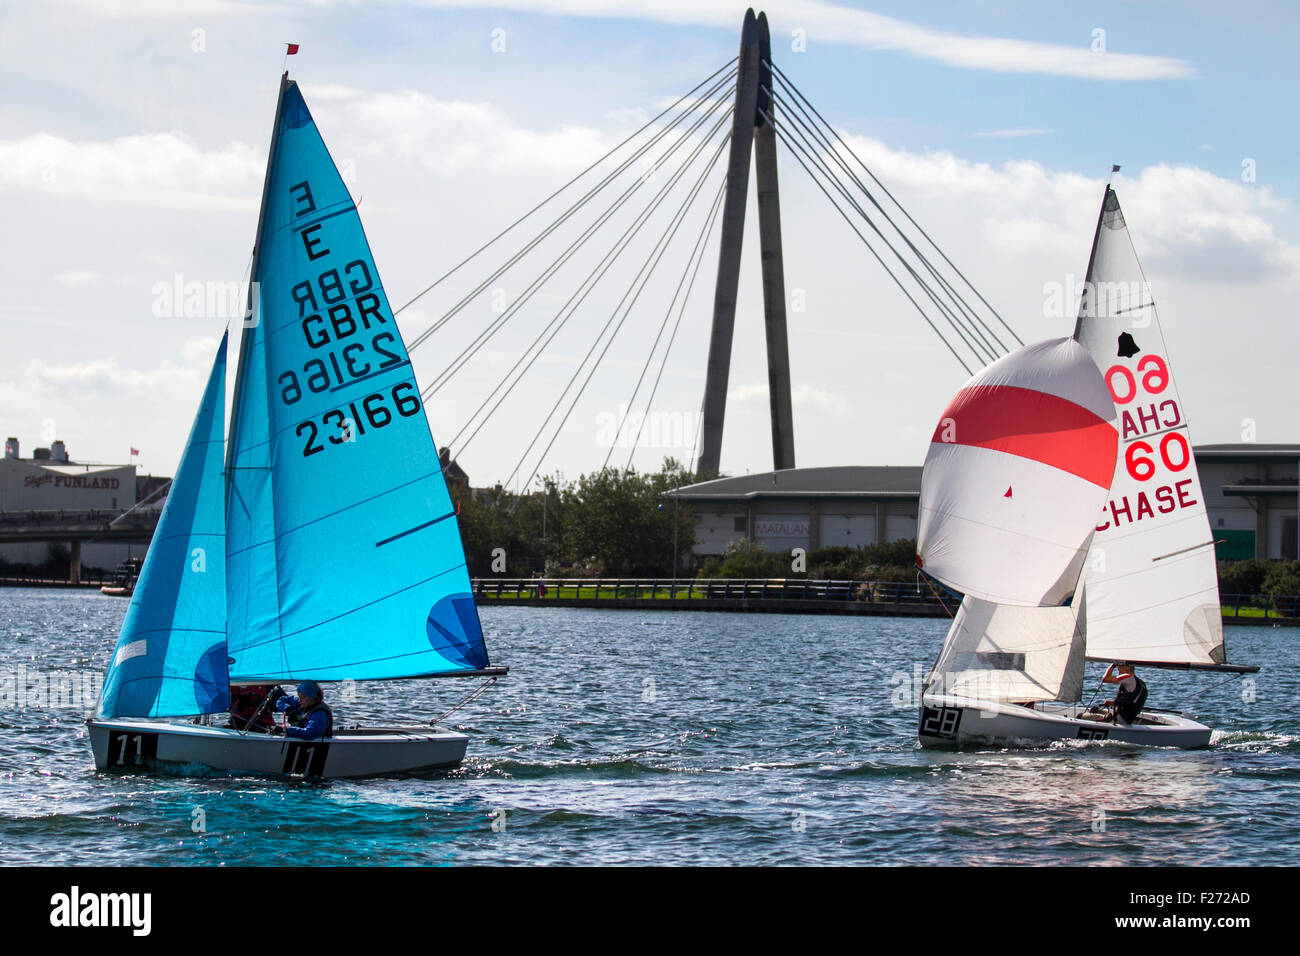 Southport, Merseyside, UK. 13th September, 2015. The Southport 24 Hour Race is a national sailing endurance race for two-handed sailing dinghies, with 63 Firefly, Lark, Enterprise and GP 14 boats competing. The race, hosted by the West Lancs Yacht Club, has a long history and is usually held in September. The race starts at 12 noon on the Saturday. The contestants then race their dinghies around the marine lake finishing at noon today.  During the hours of darkness, the helm and crew of each dinghy must keep a careful watch for other boats (often capsized).  Credit:  Mar Photographics/Alamy Li Stock Photo